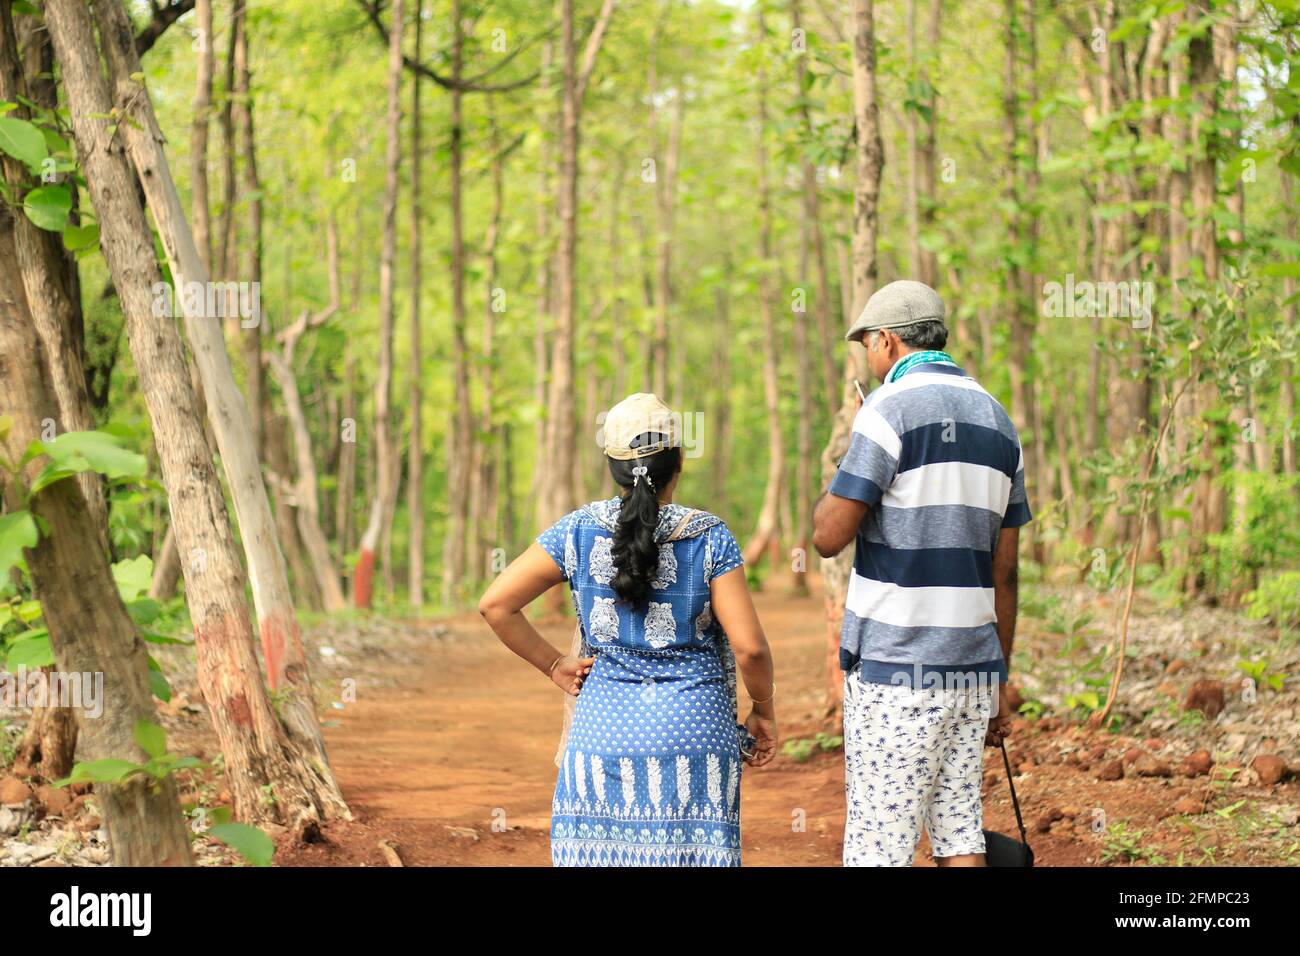 Backside view of a middle aged couple (40-45 yrs) discussing about a topic and looking towards each other inside a forest Stock Photo